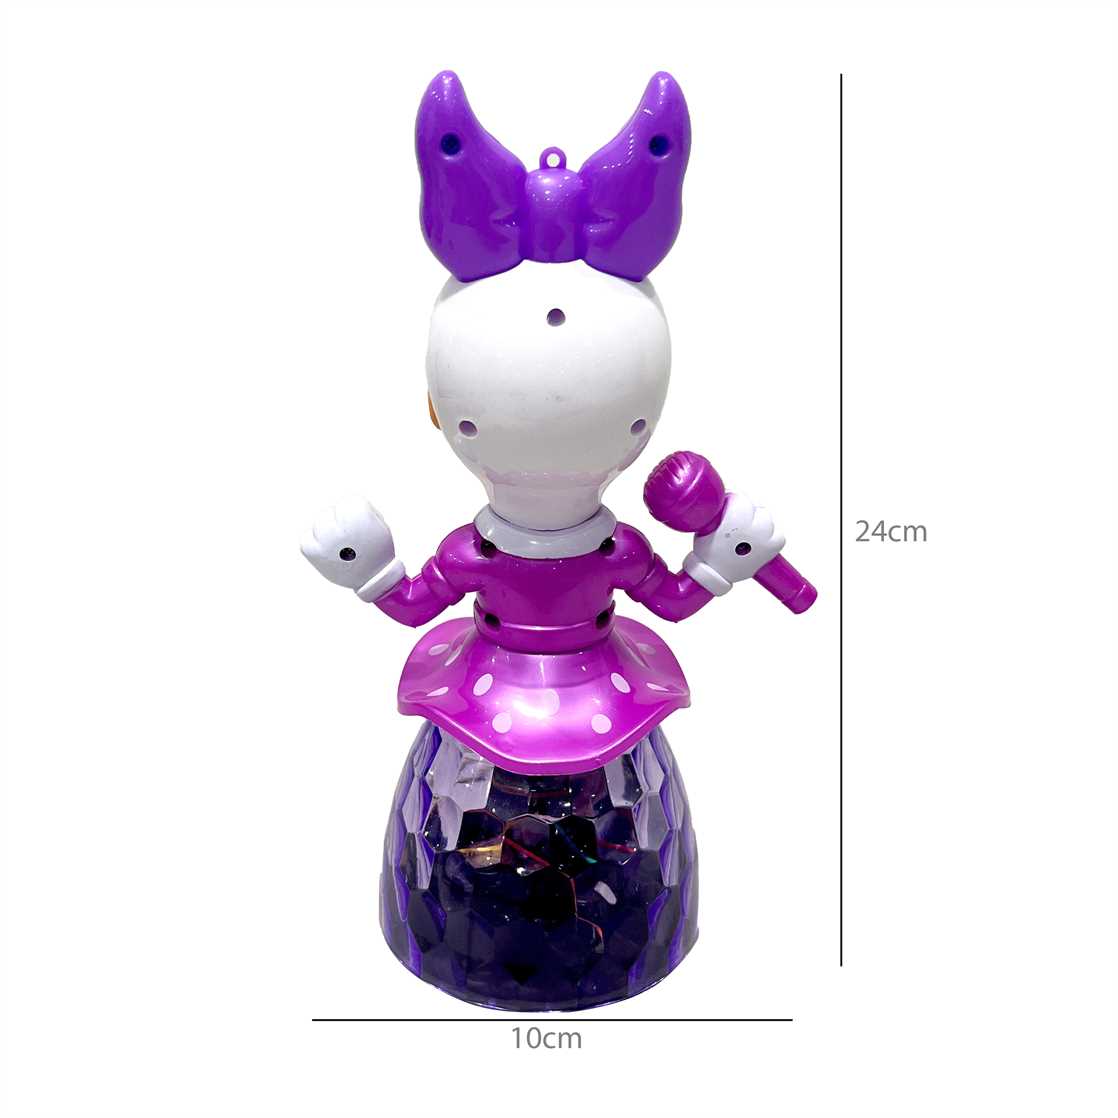 Buy Singing Daisy Duck Battery Operated Toy Online in India